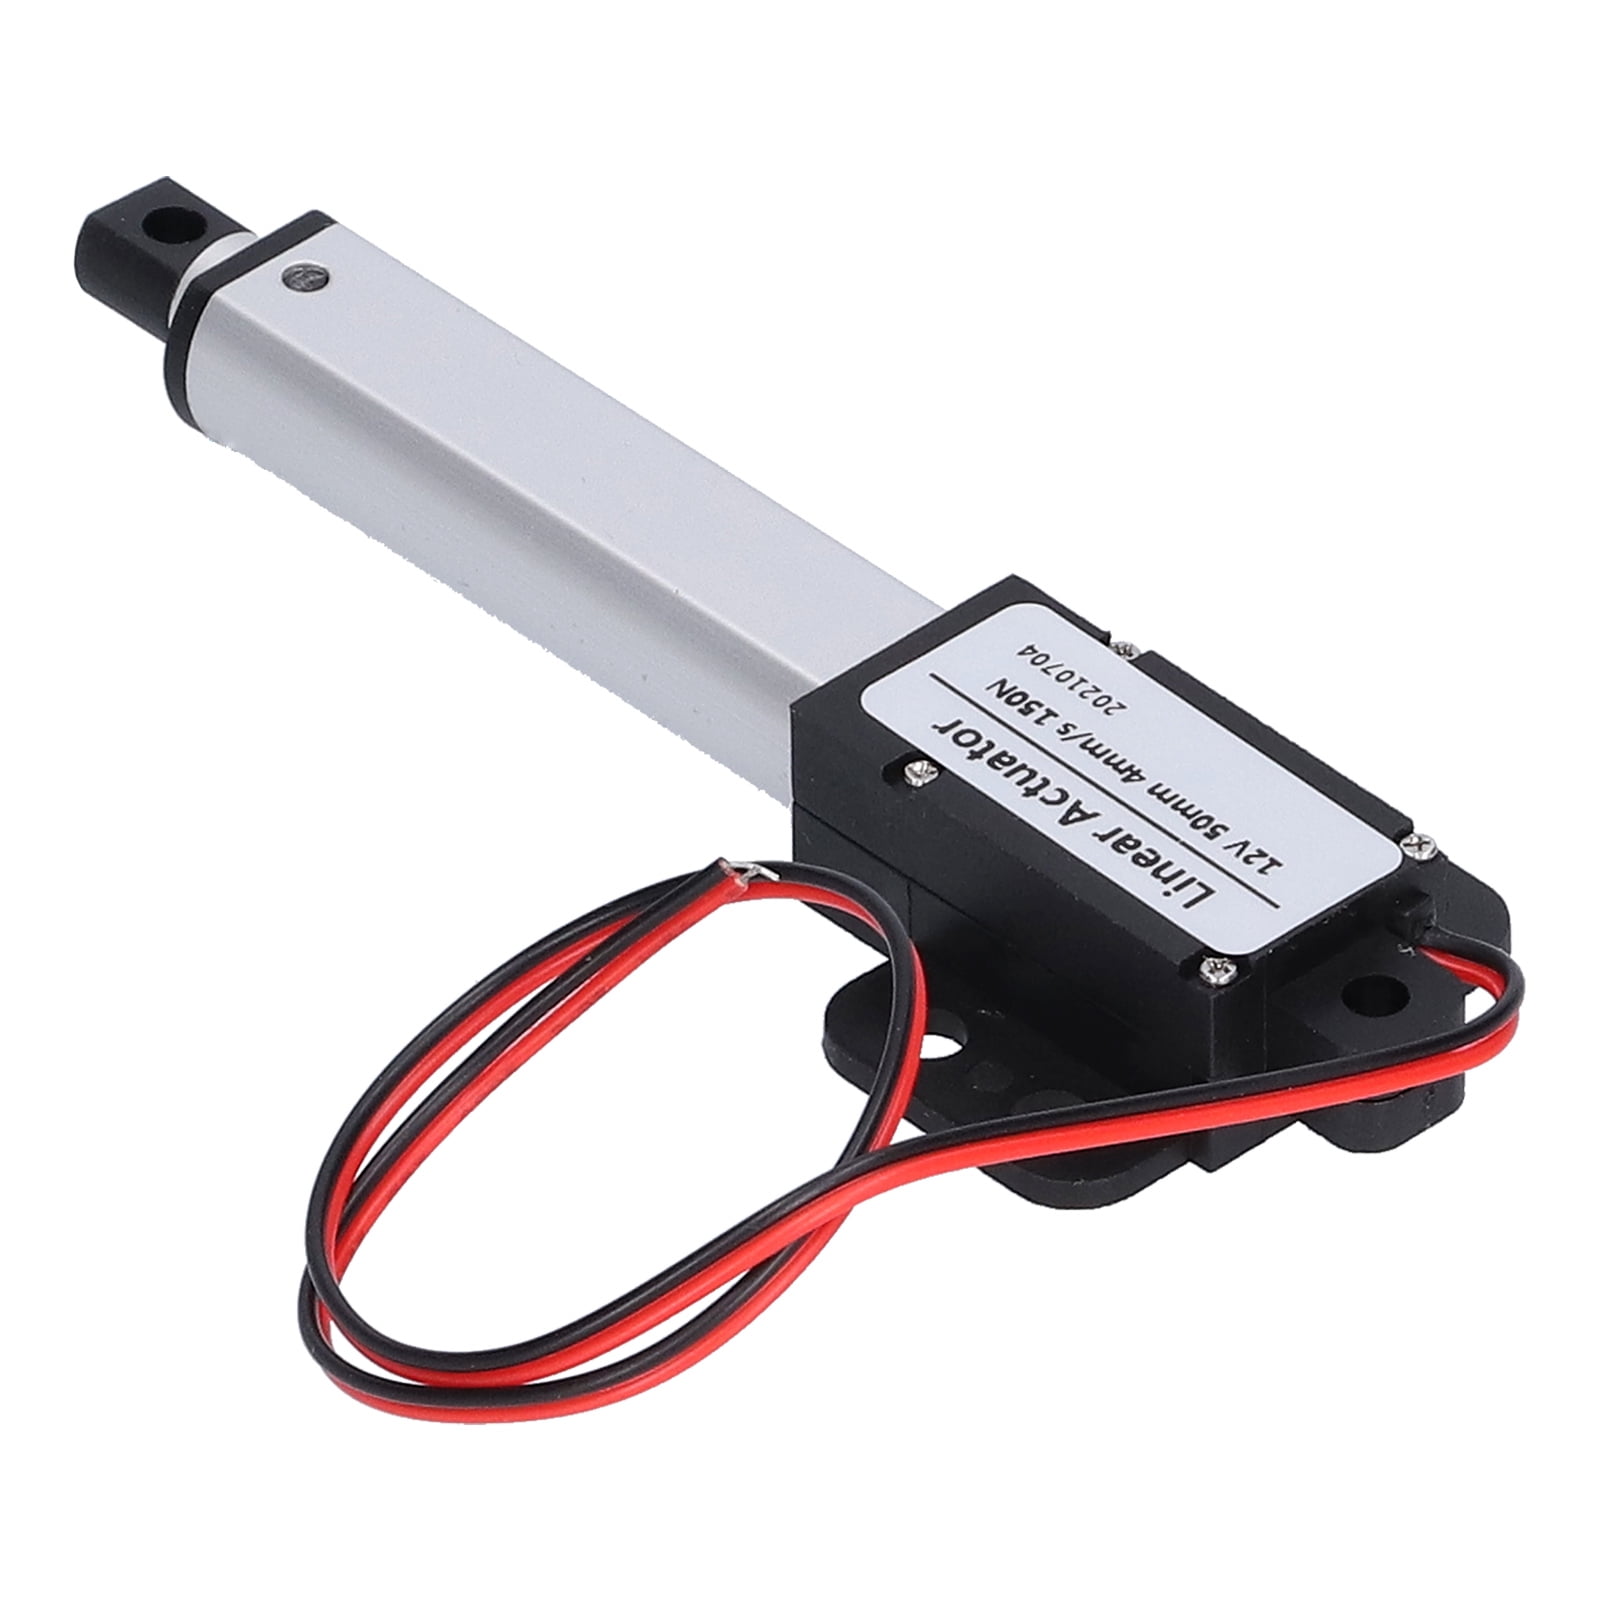 Linear Actuator Motor, Short Circuit Protection Linear Actuator Low Noise  Mini 50mm 12v DC With Mounting Bracket For Home For For Automotive  4mm/s-150N